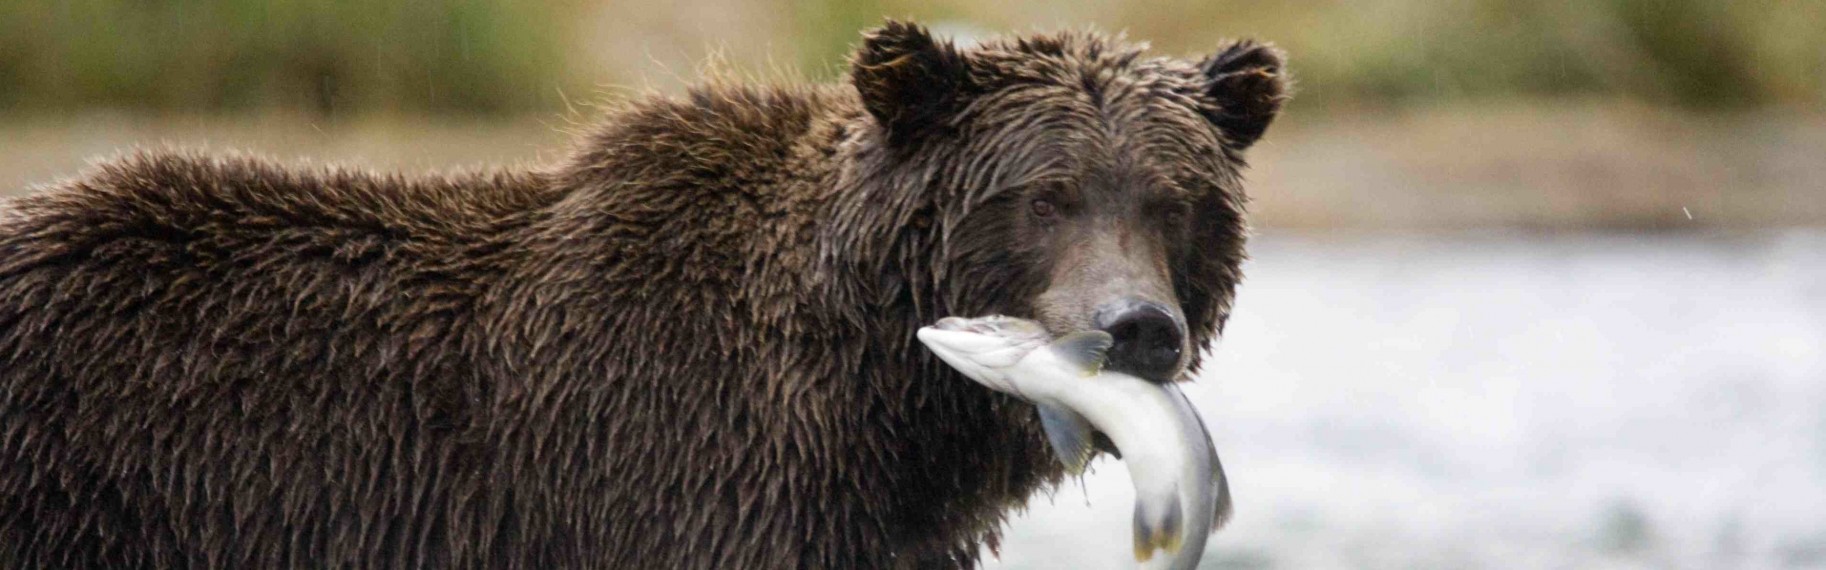 A brown bear with a fish in its mouth.